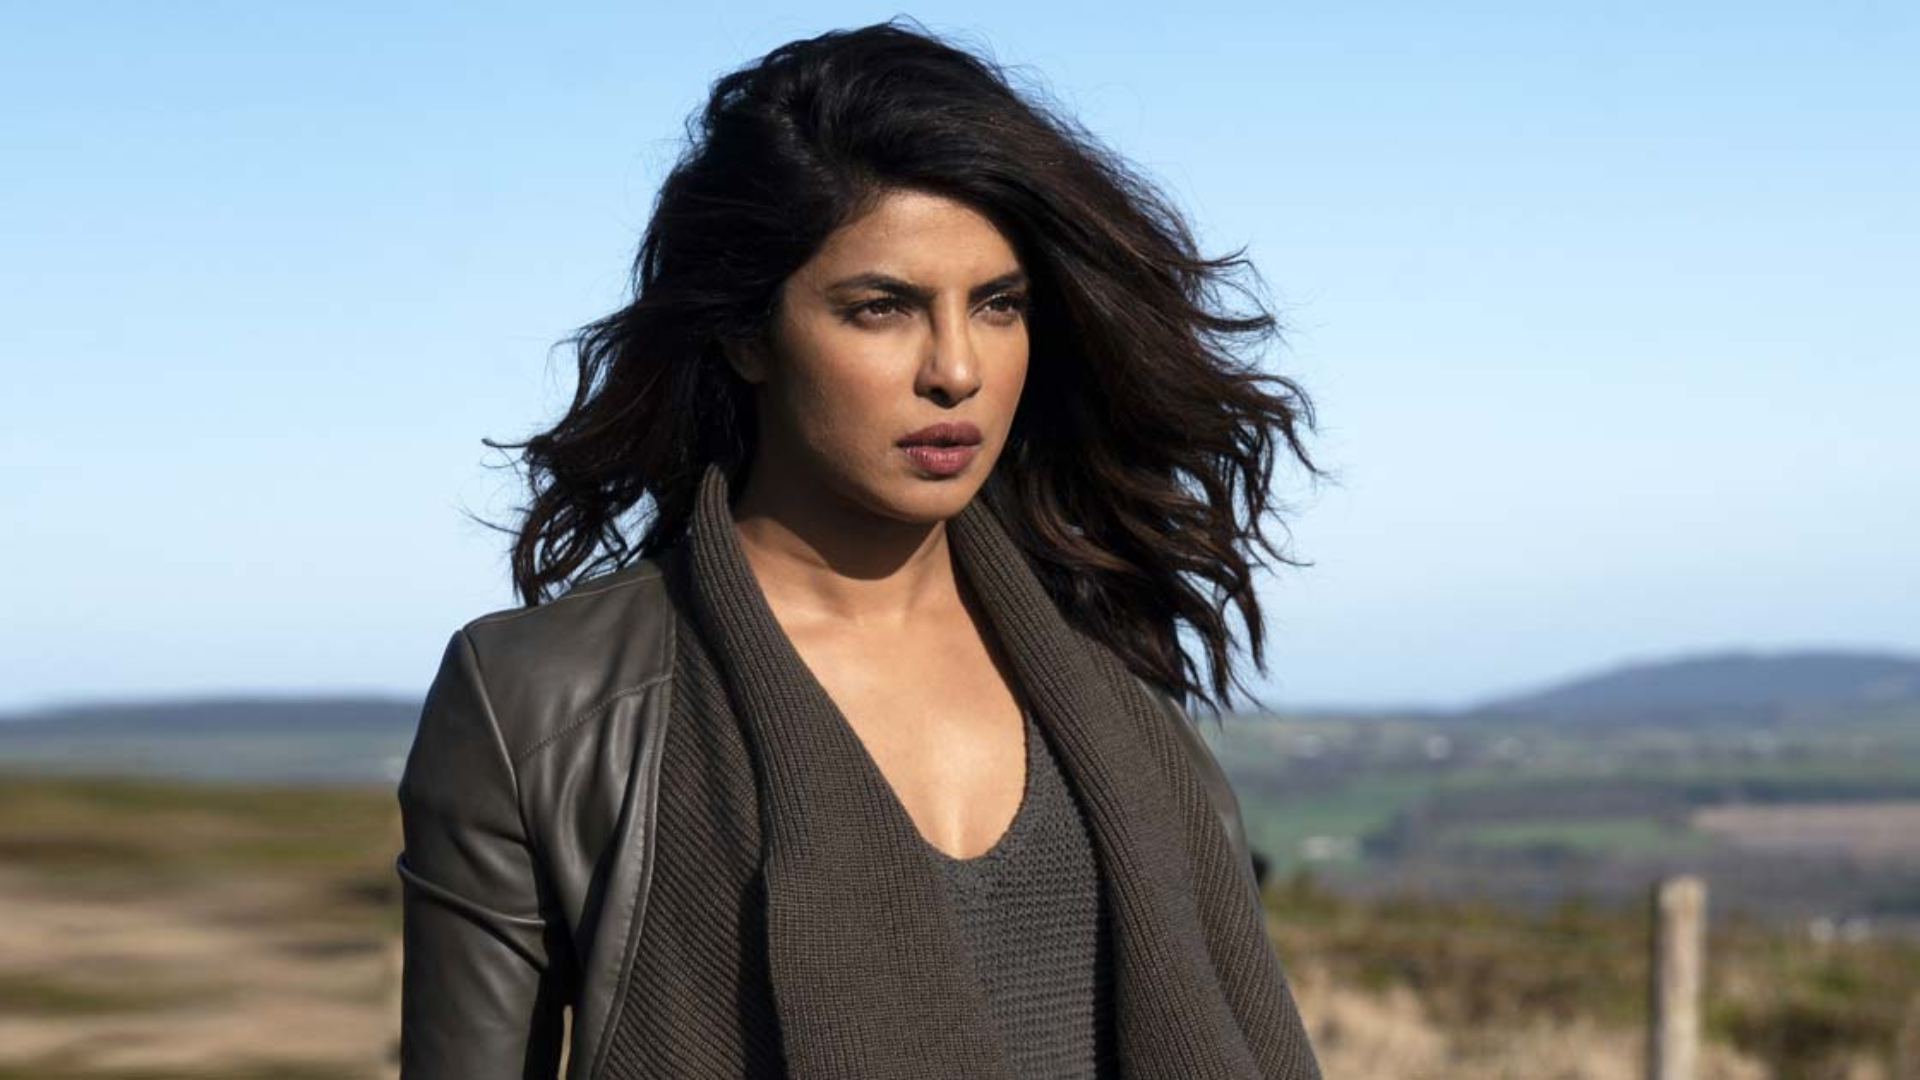 Priyanka Chopra Joins Forces with Barry Avrich for Documentary 'Born Hungry'